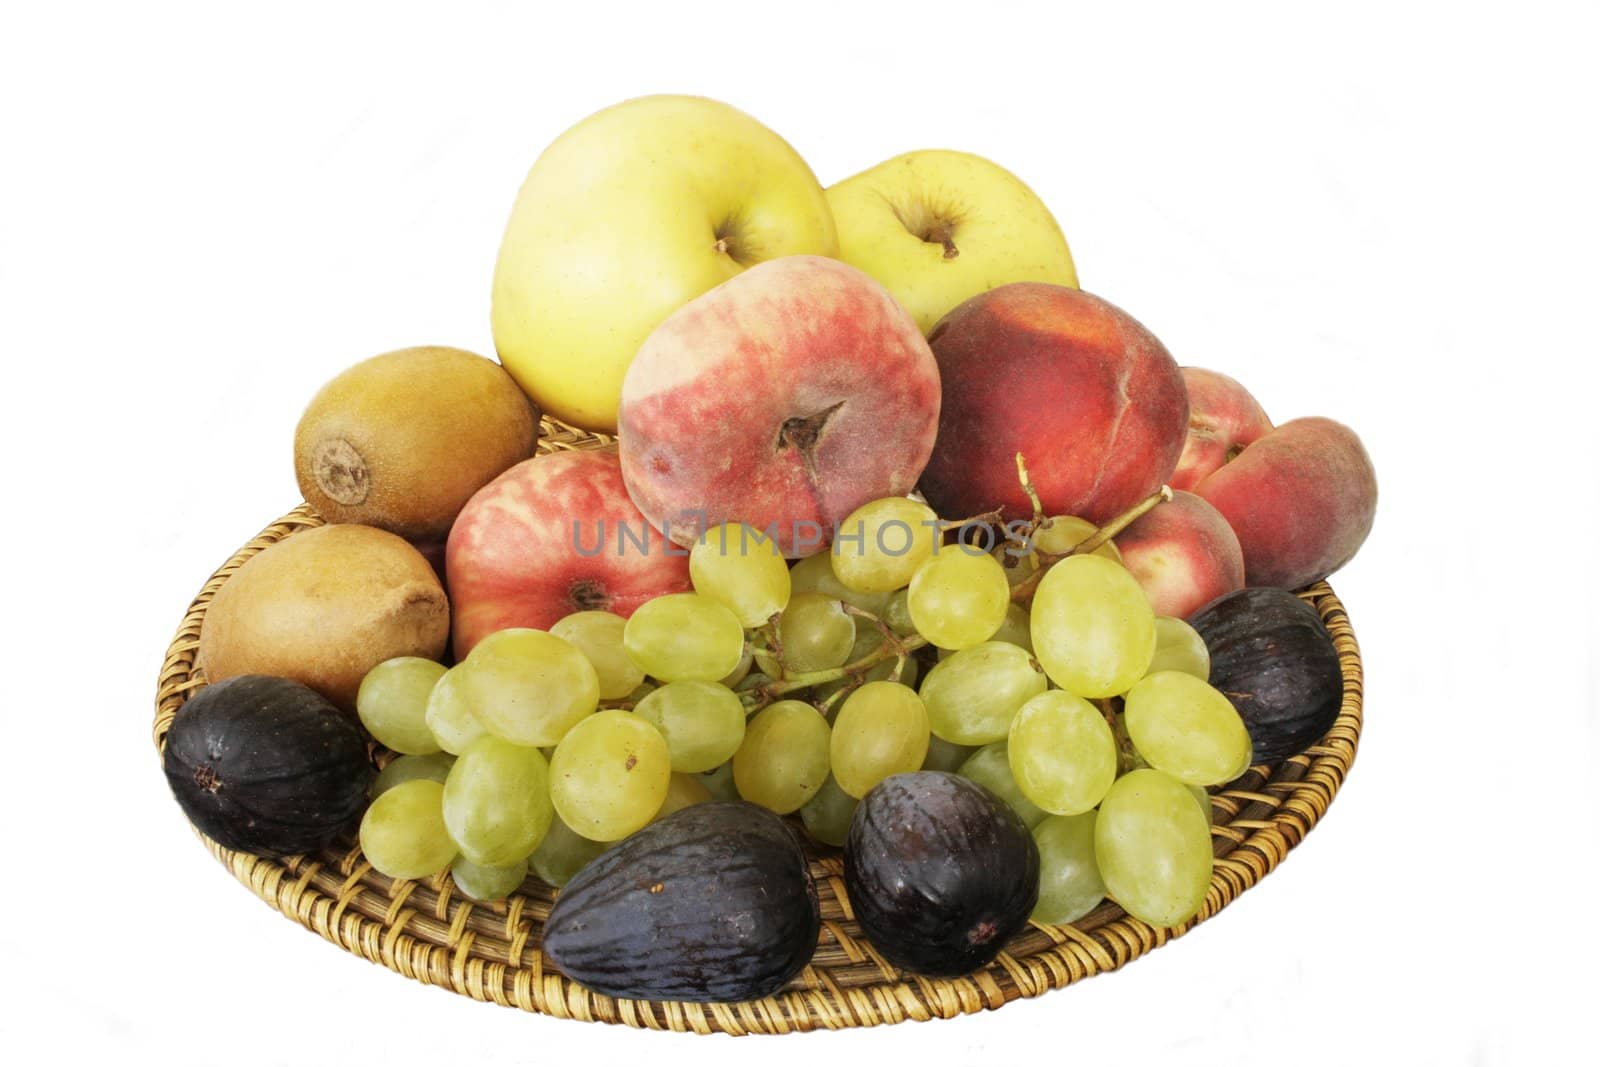  Fruits on wicked wooden plate in isolated over white